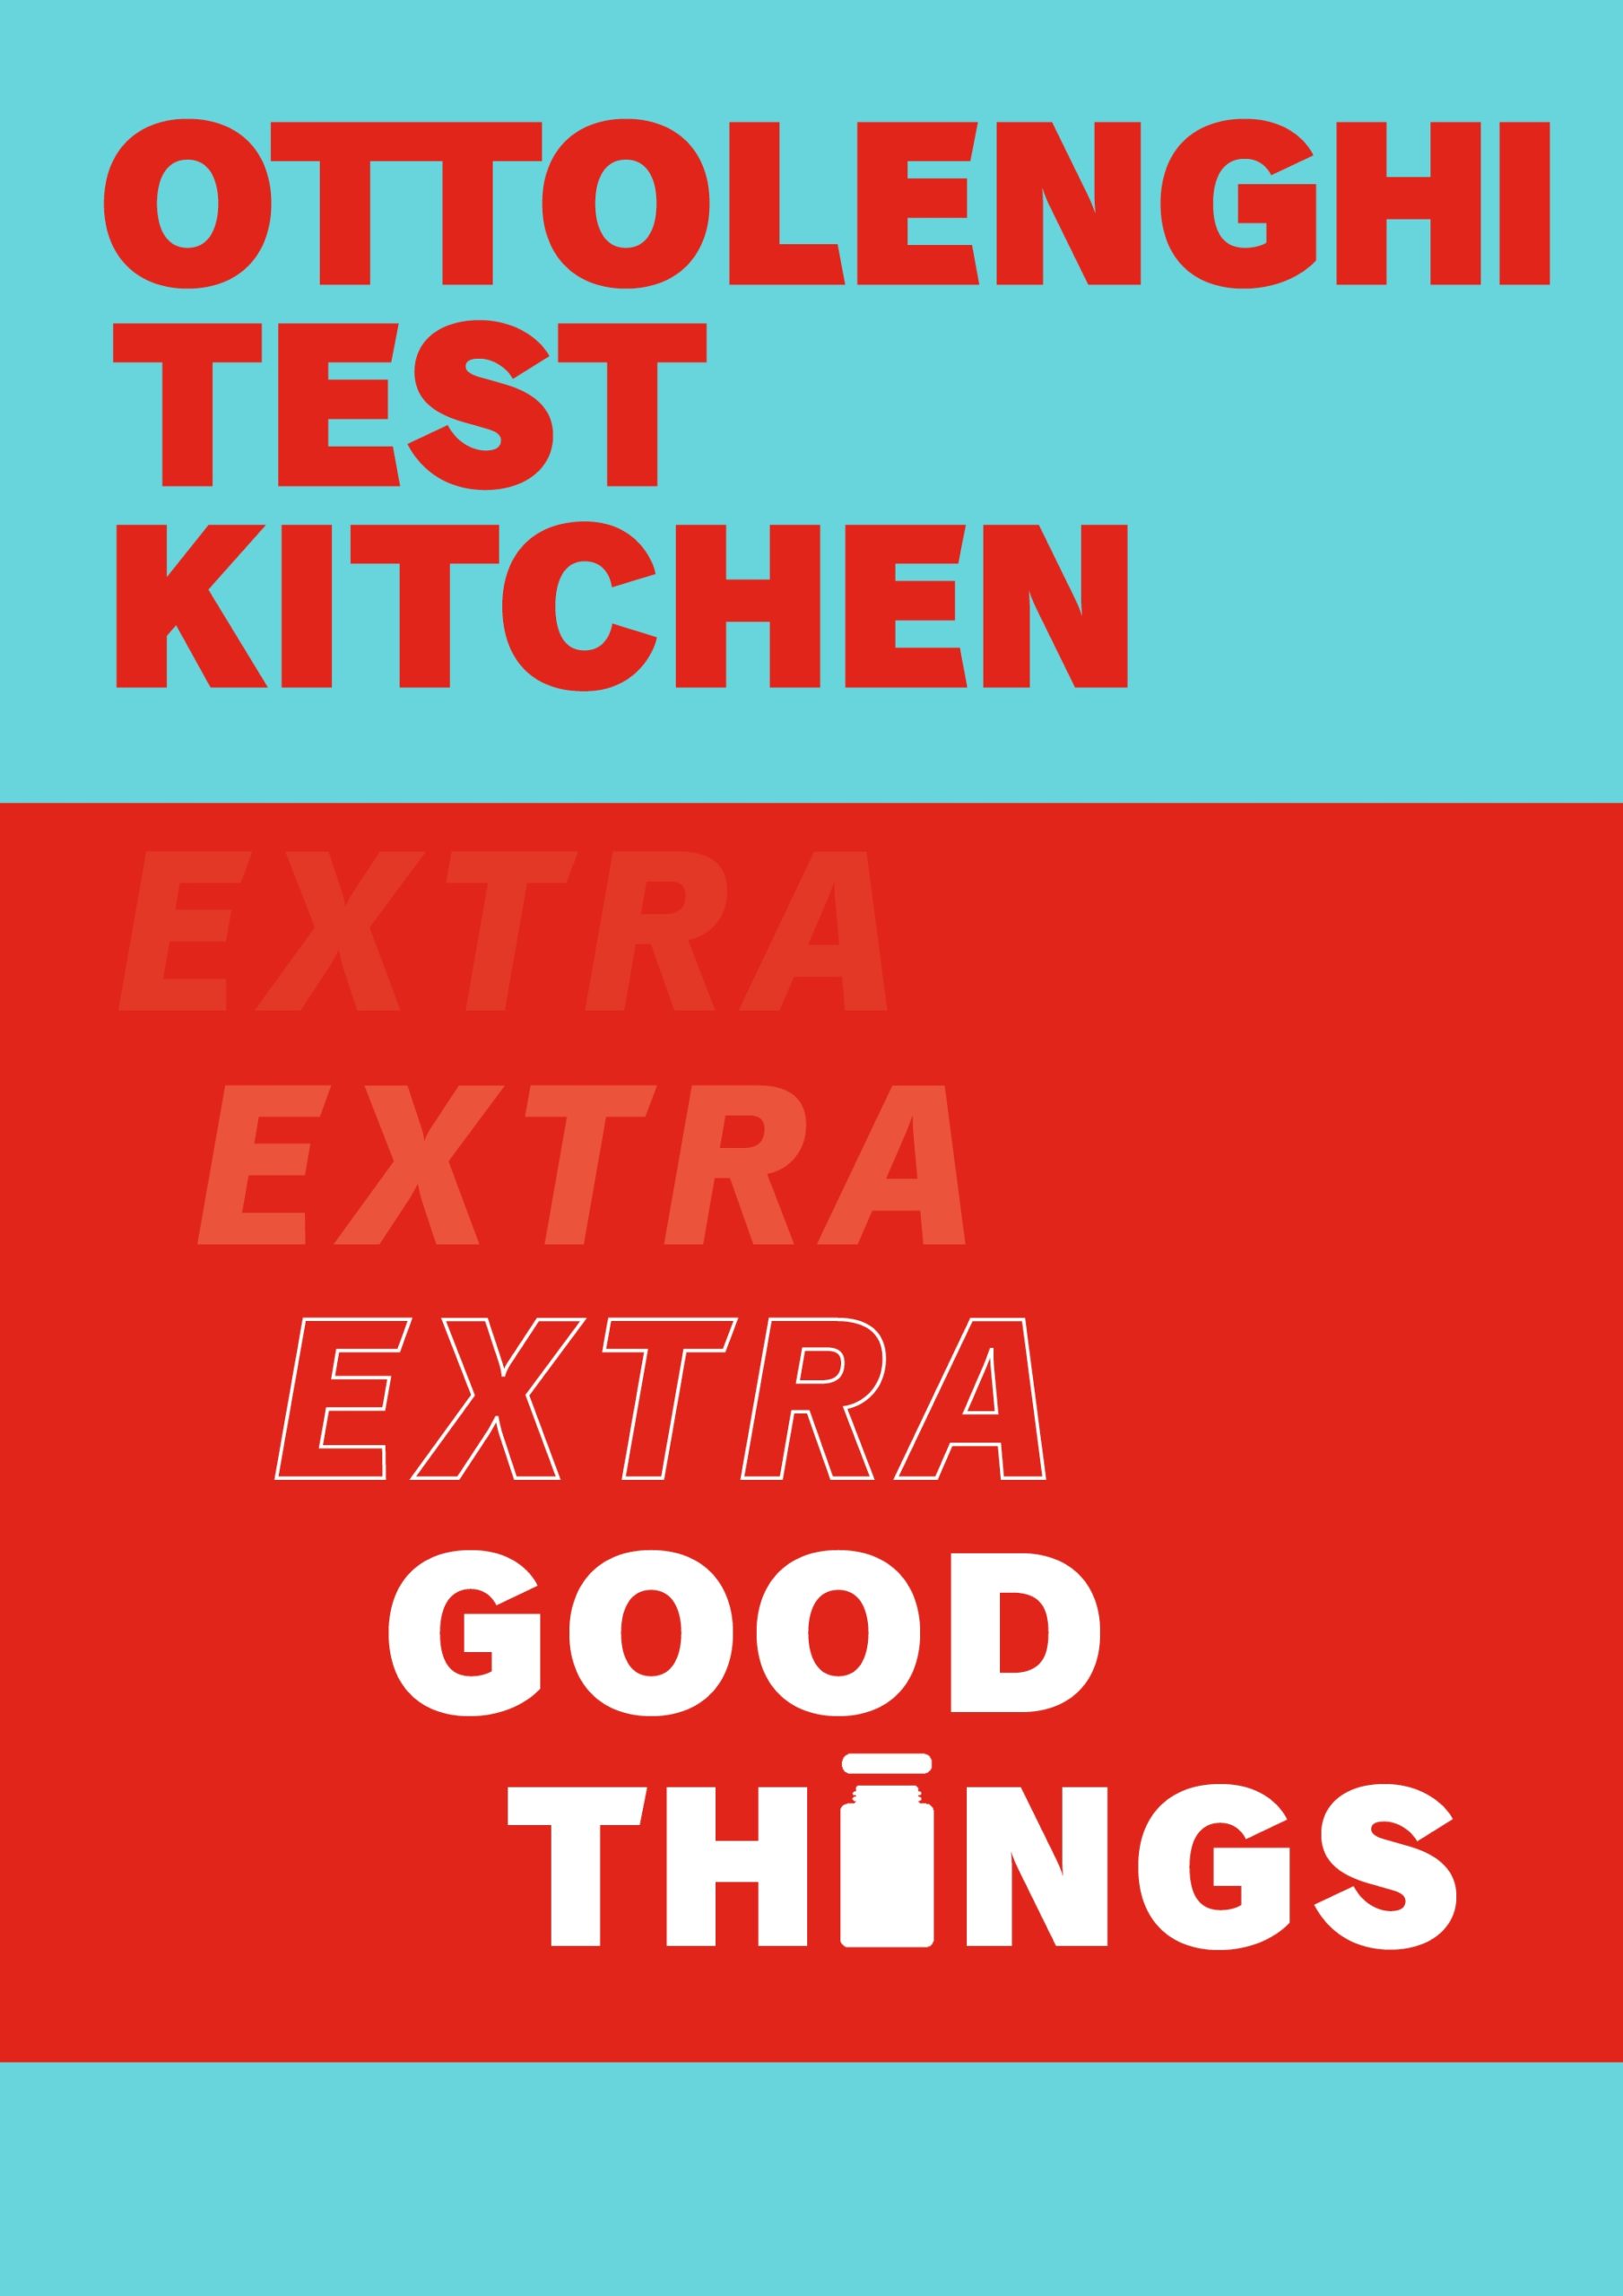 Extra Good Things  New Cookbook Ottolenghi Test Kitchen 2022